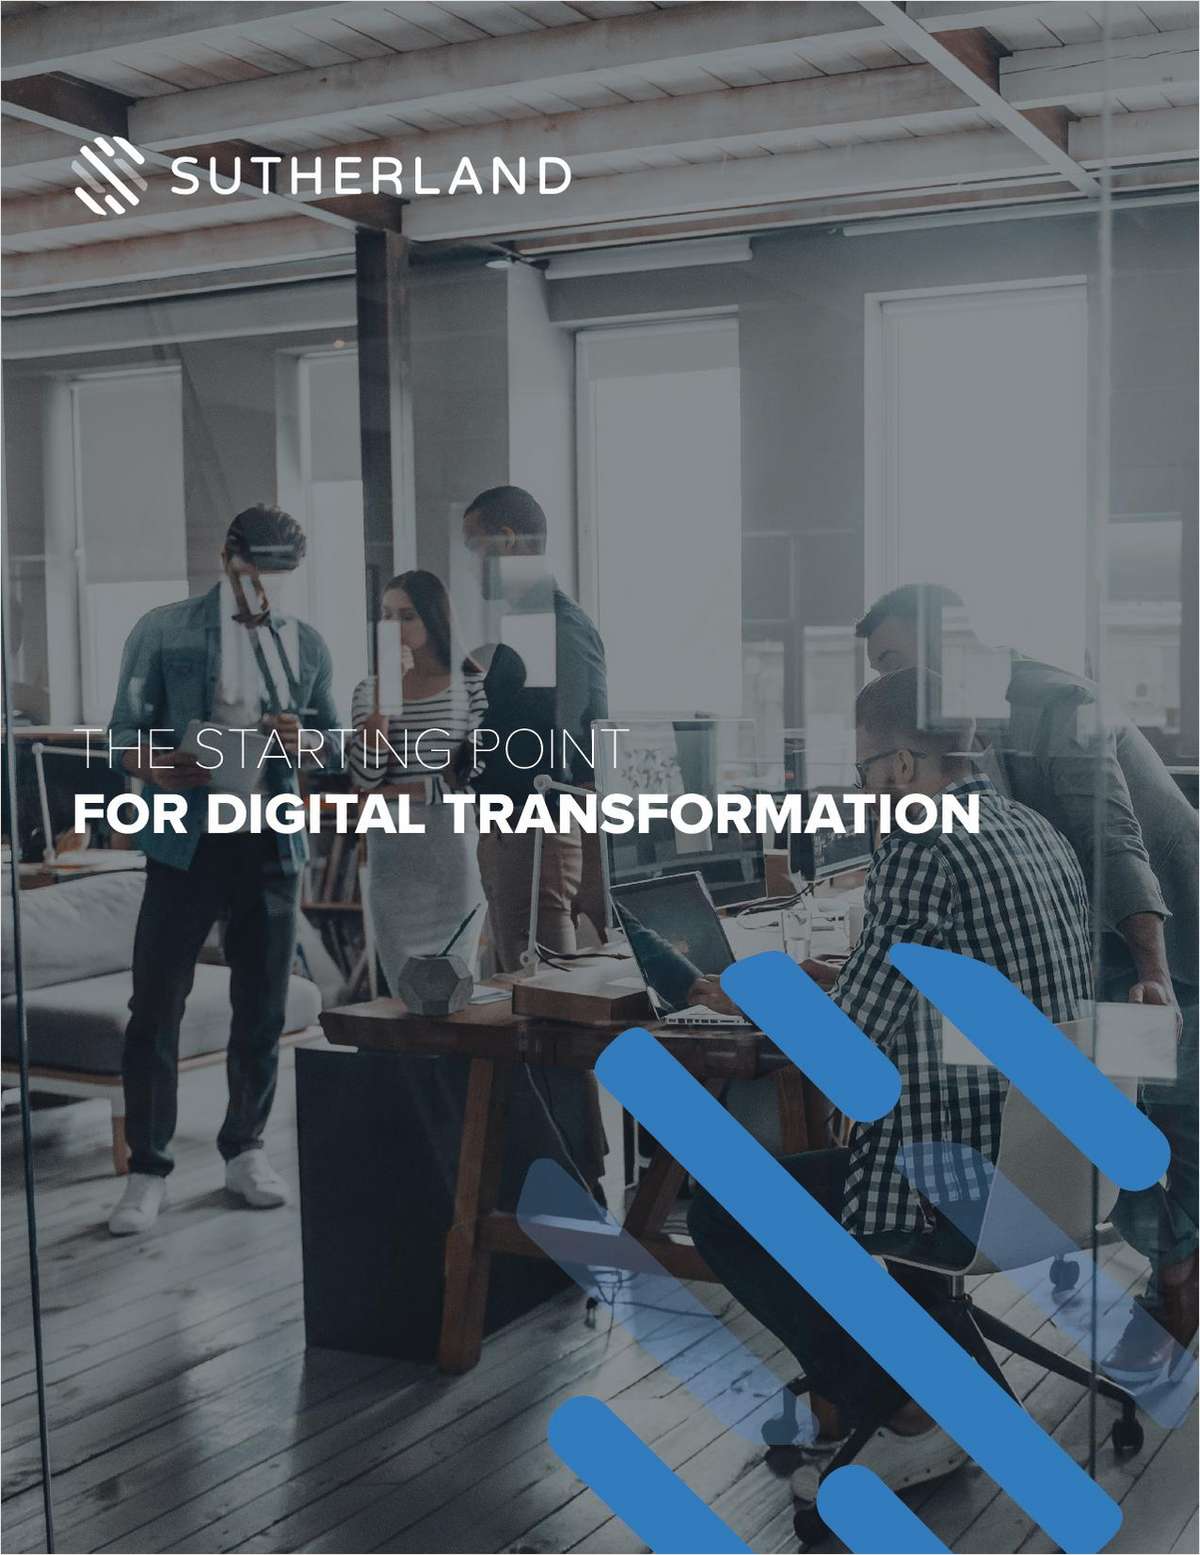 The Starting Point for Digital Transformation